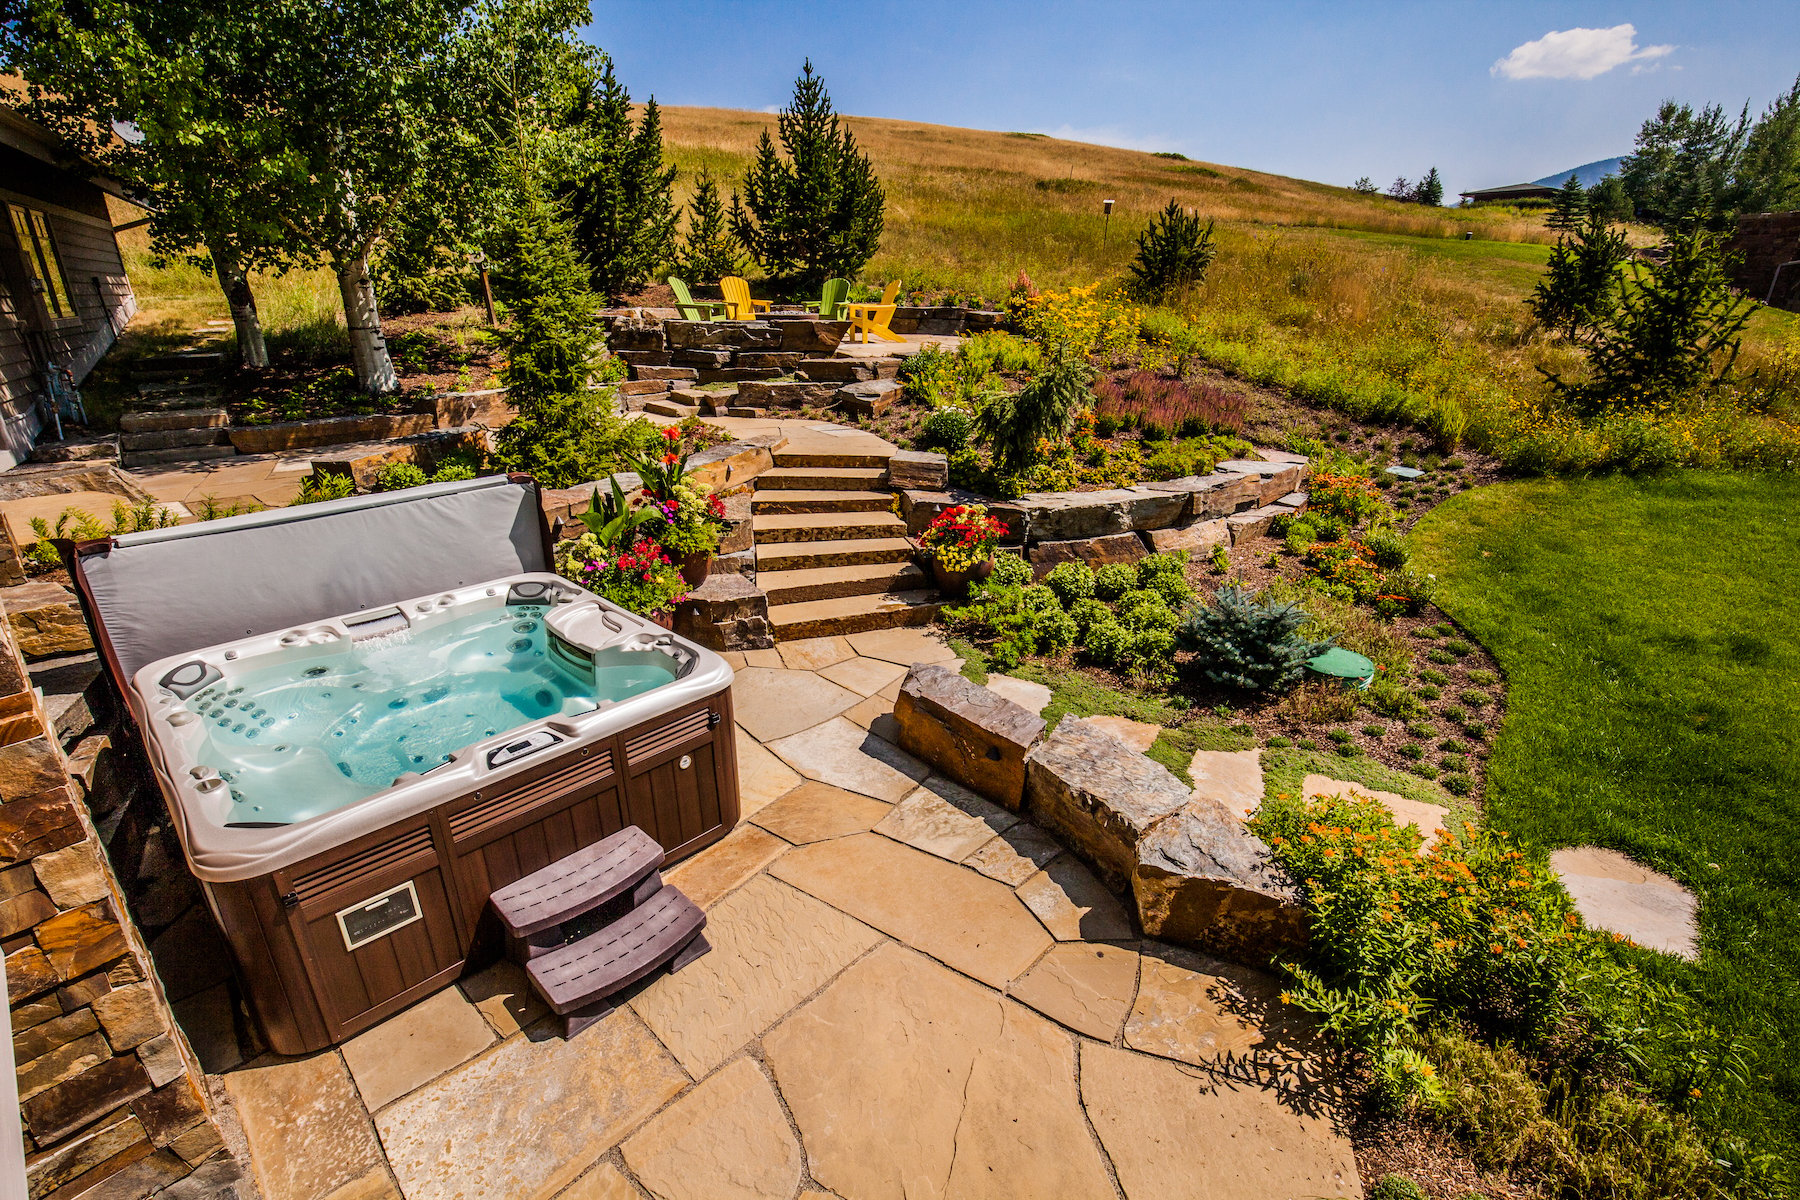 Outdoor Hot Tub Landscaping Ideas Where To Place It And What To Put Around It